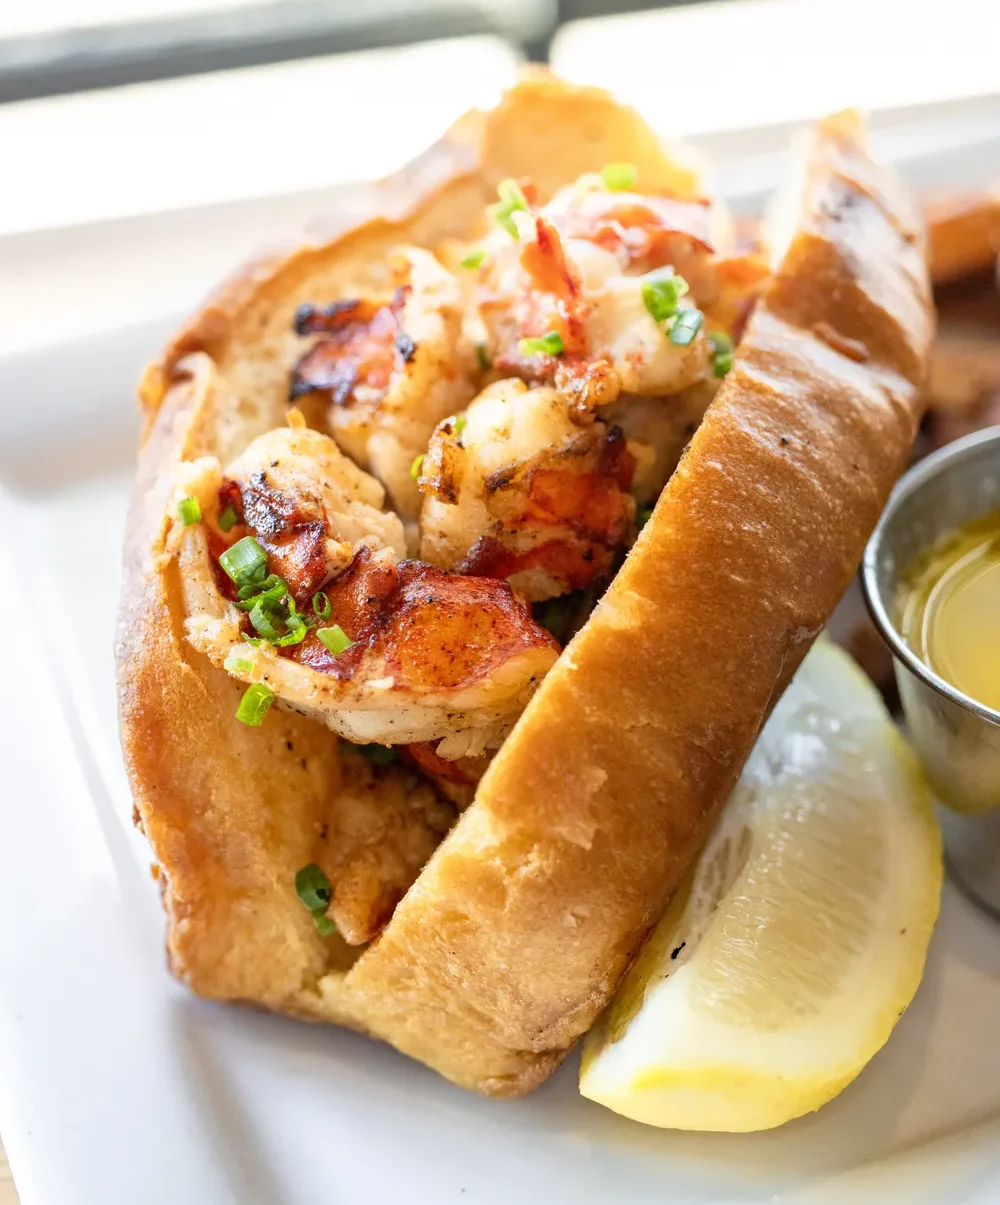 The Maine Lobster Roll at Chesapeake & Maine 